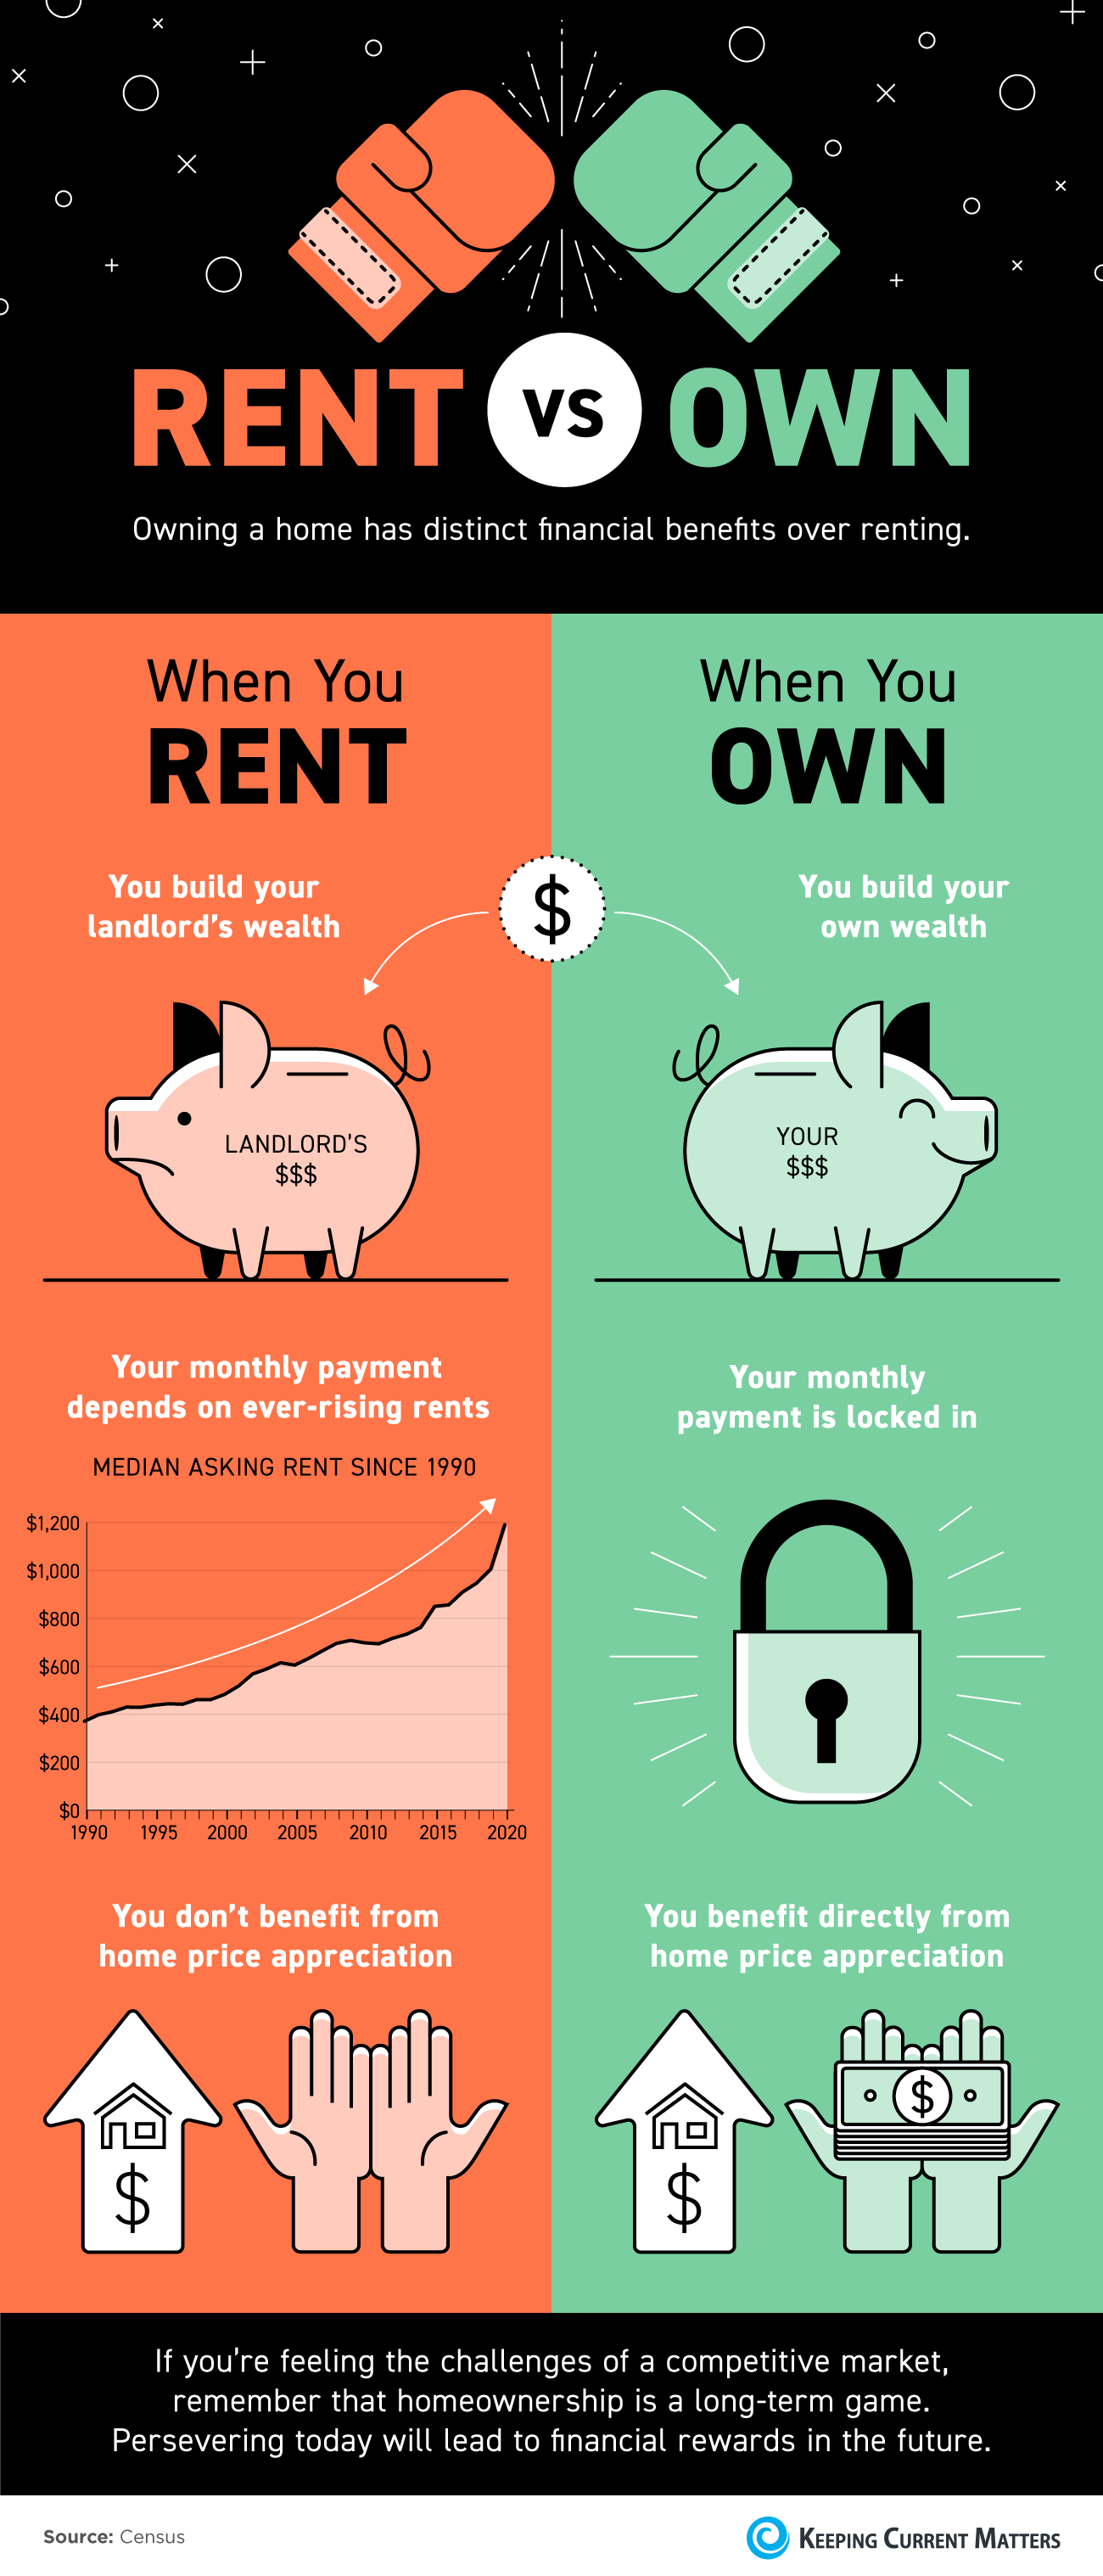 Owning a Home Has Distinct Financial Benefits Over Renting [INFOGRAPHIC] | Keeping Current Matters